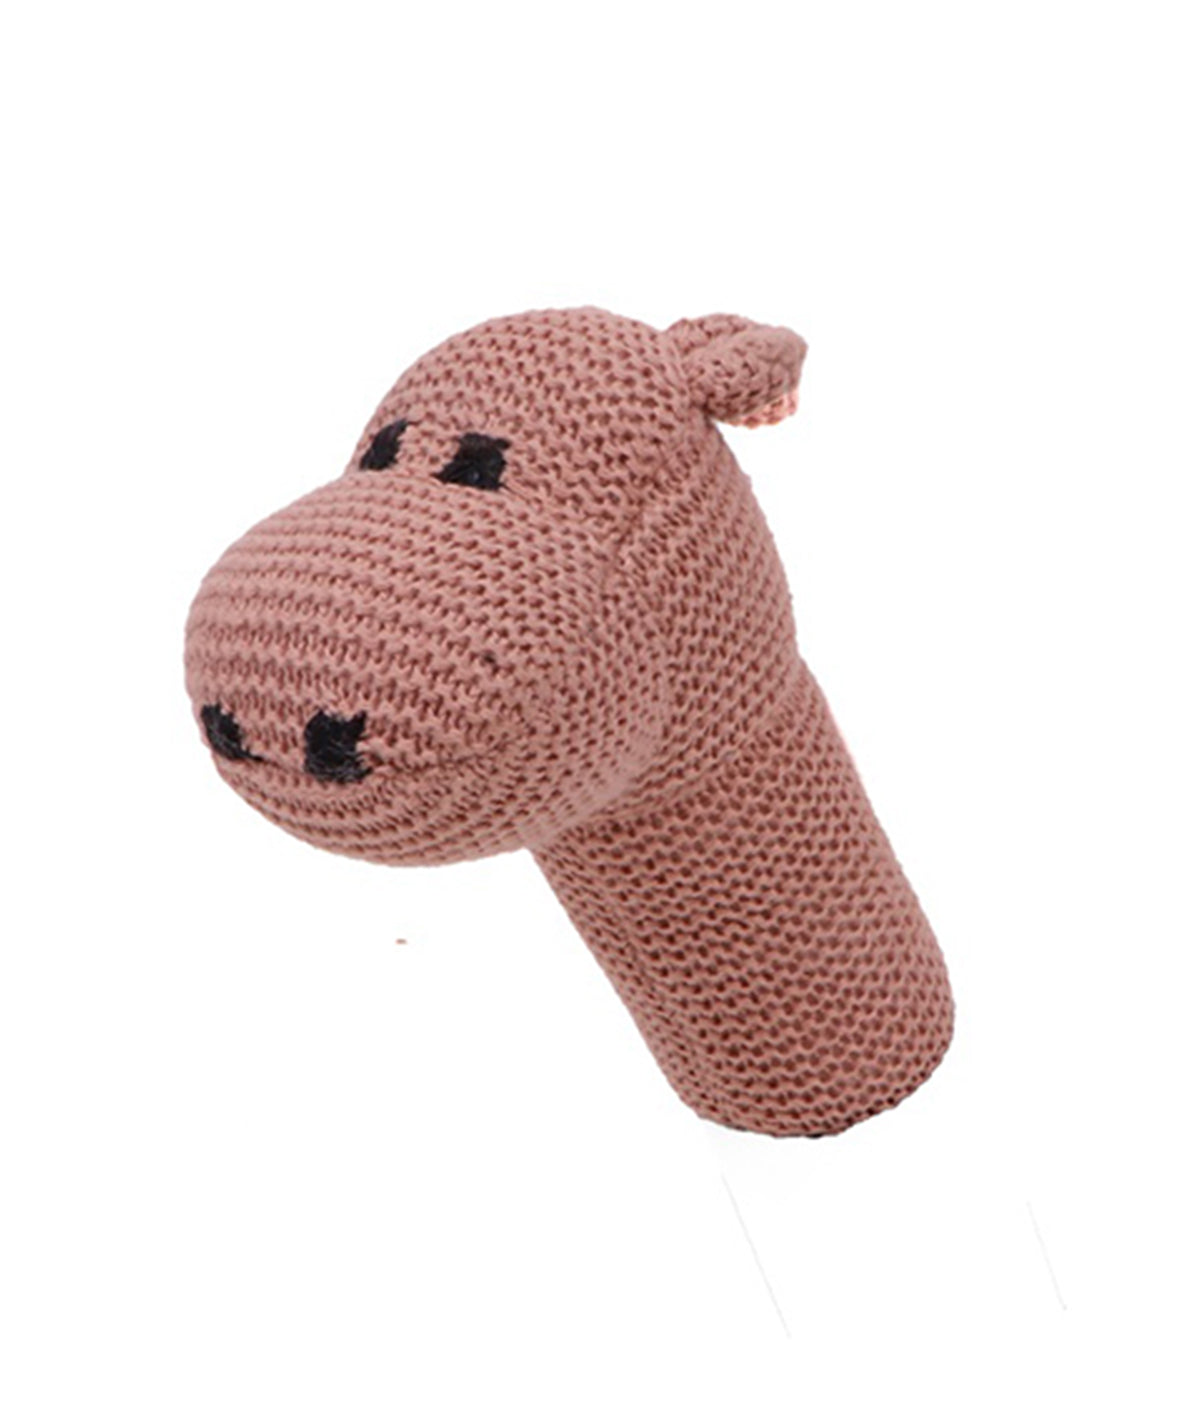 Rattle Hippo - Pale Pink 100% Cotton Knitted Stuffed Soft Toy for Babies / Kids